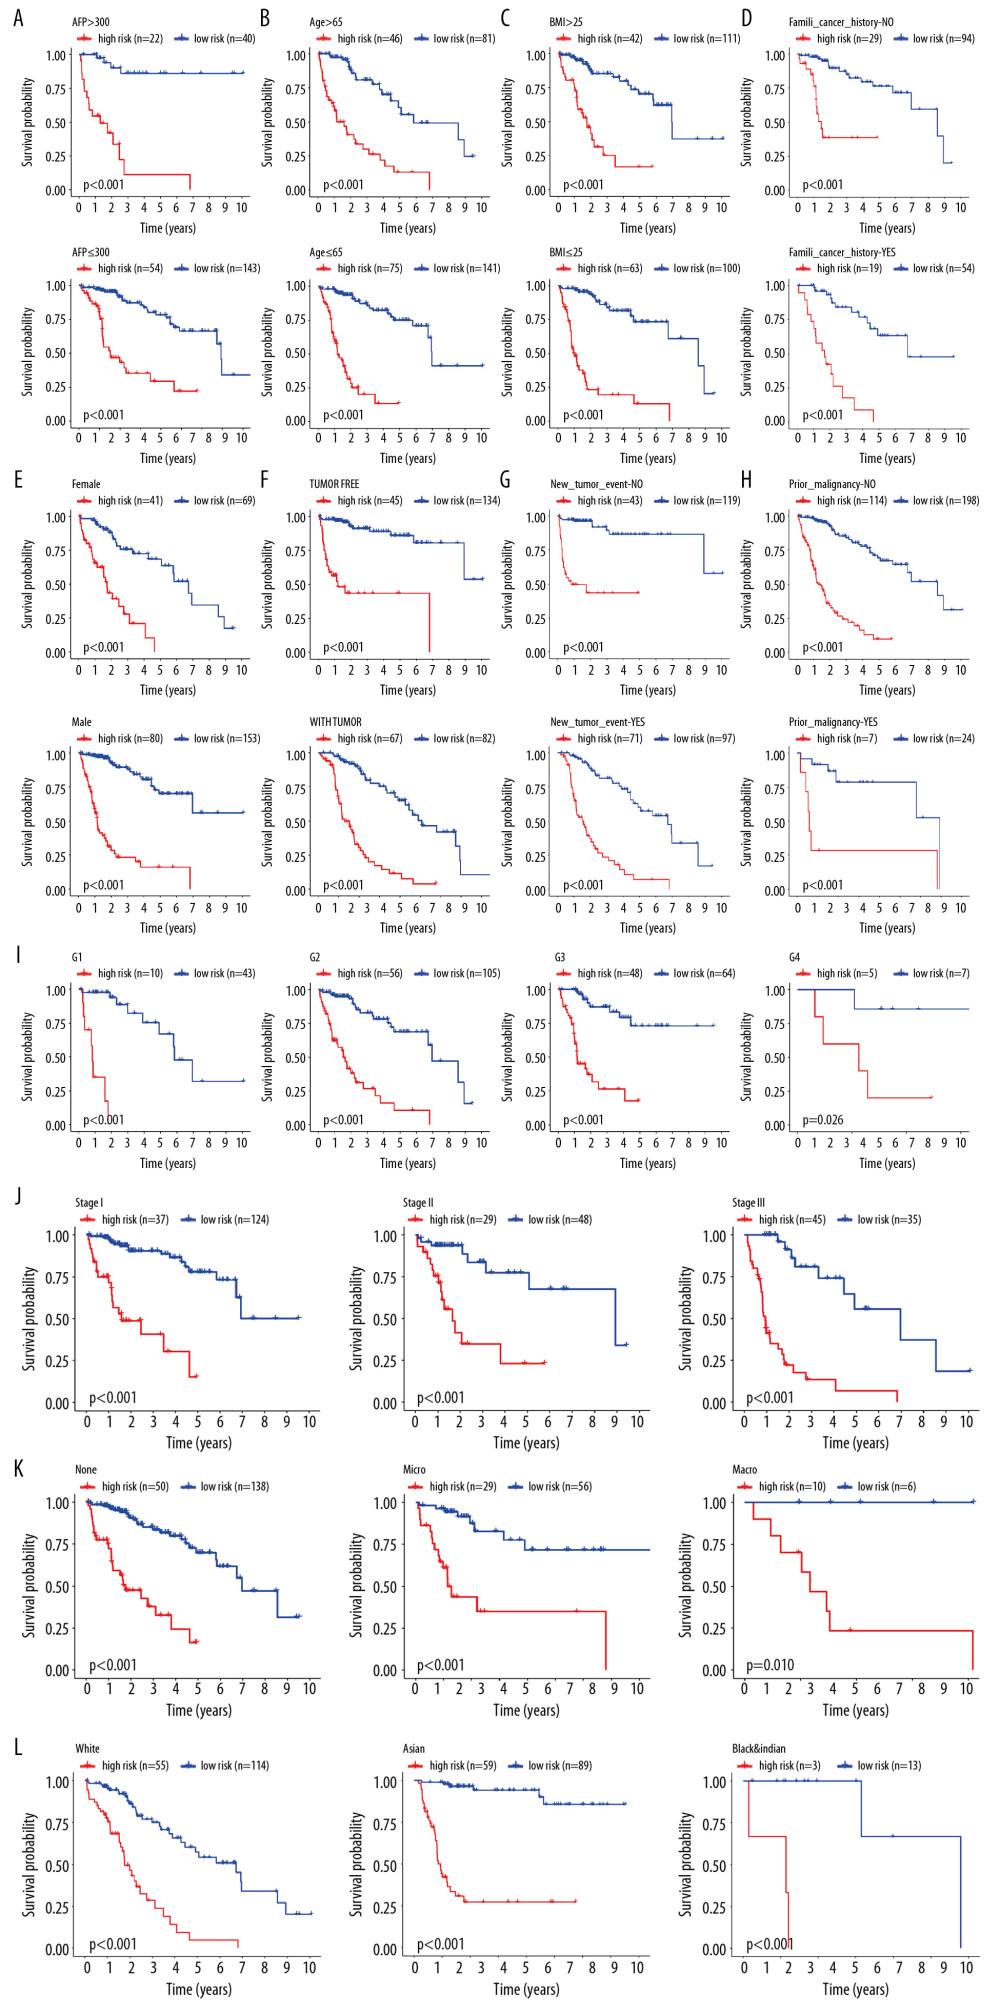 Internal validation of the prognostic model in the TCGA cohort according to clinical features. (A) AFP. (B) Age. (C) BMI. (D) Family cancer history. (E) Gender. (F) Tumor status. (G) New tumor event after treatment initiation. (H) Prior malignancy. (I) Histologic grade. (J) AJCC stage. (K) Vascular tumor cell type. (L) Race.